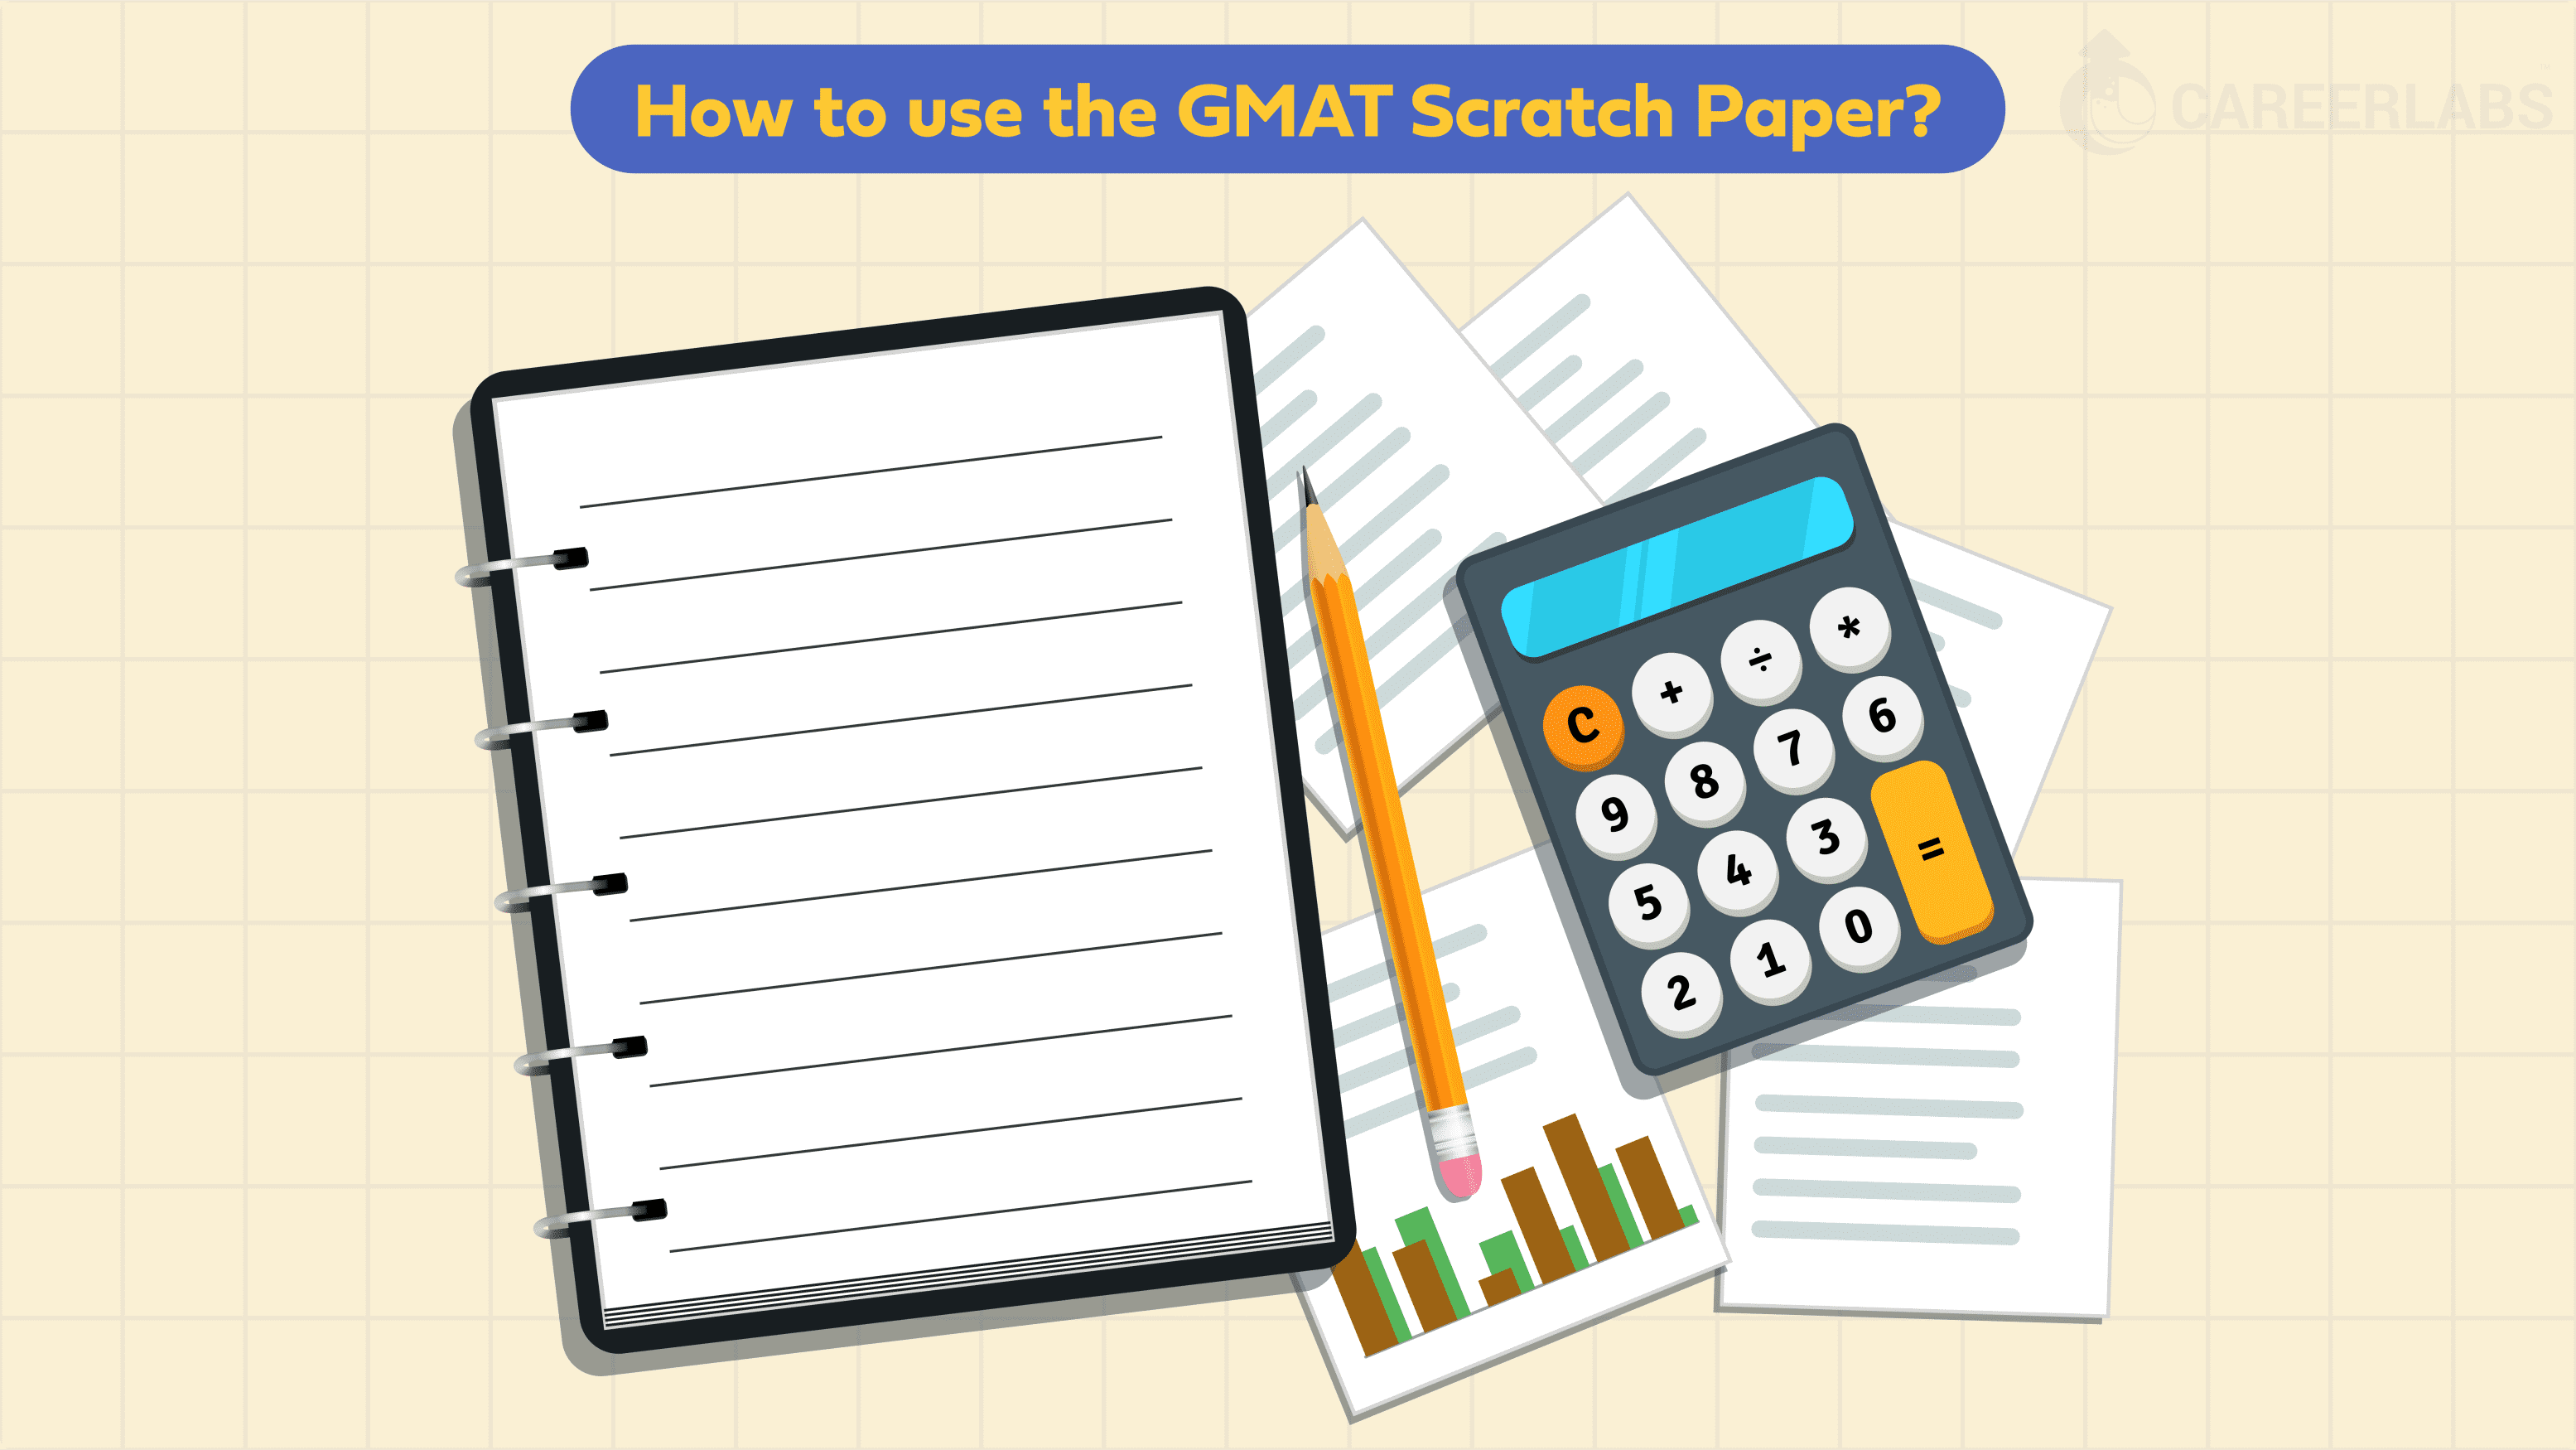 GMAT Scratch Paper  How to Use it Effectively and efficiently?